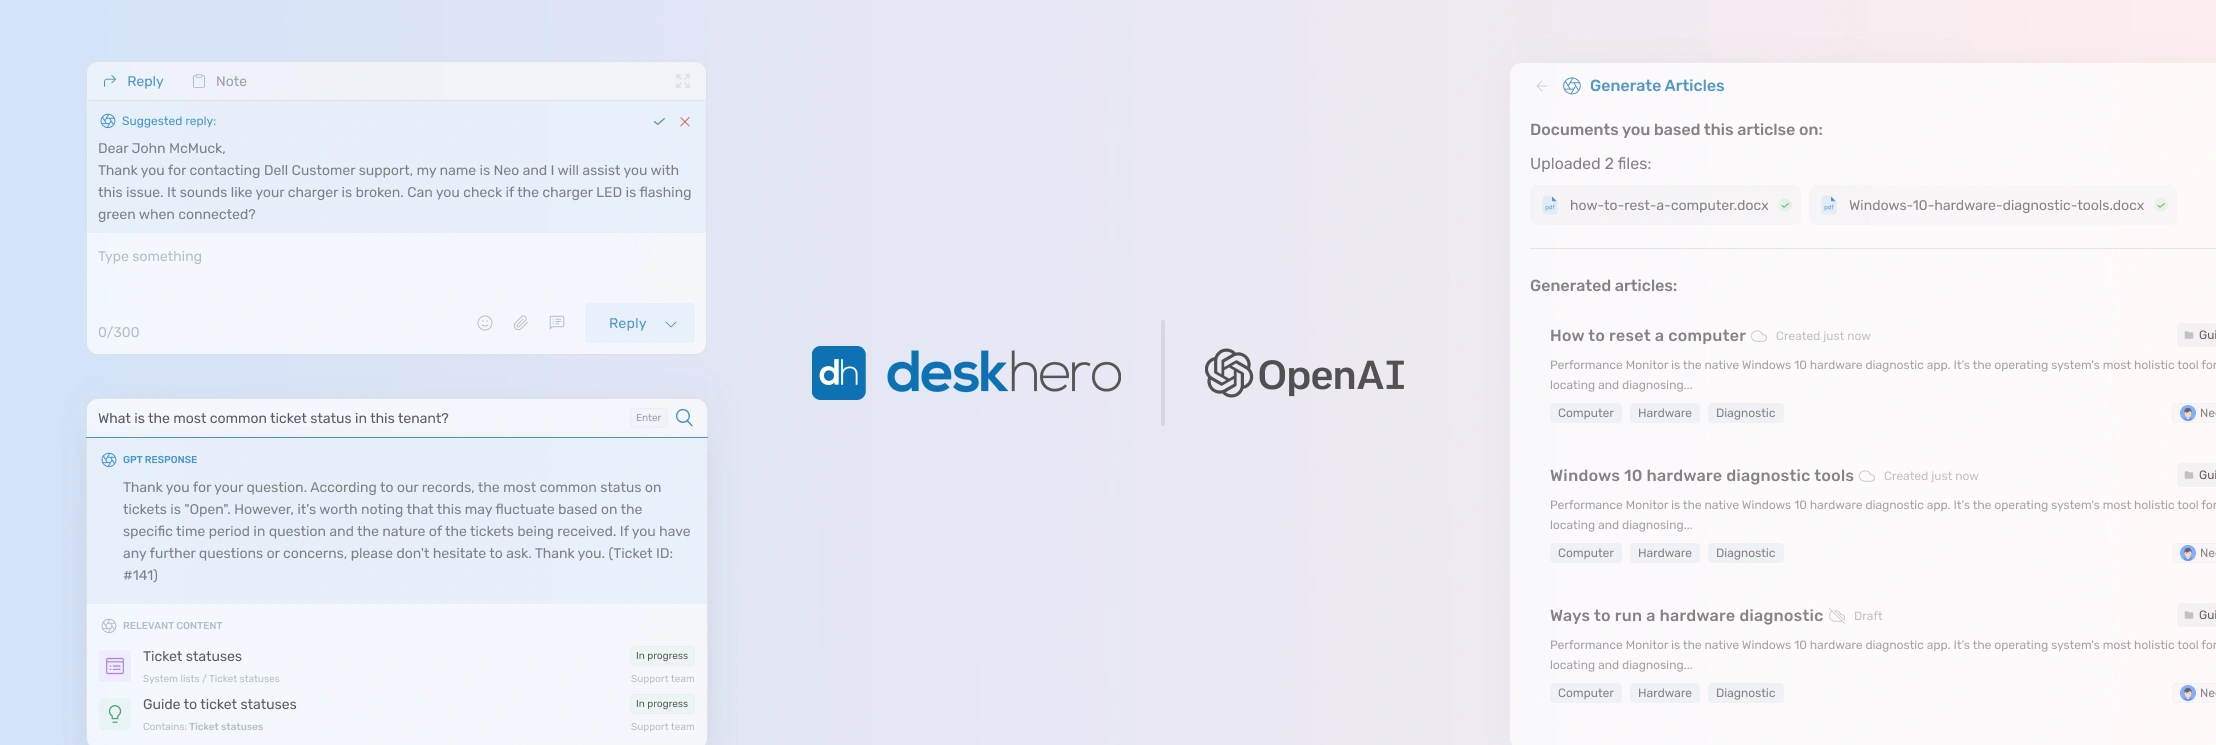 Streamlining Customer Support with Deskhero's AI Capabilities at PureOil Manufacturing